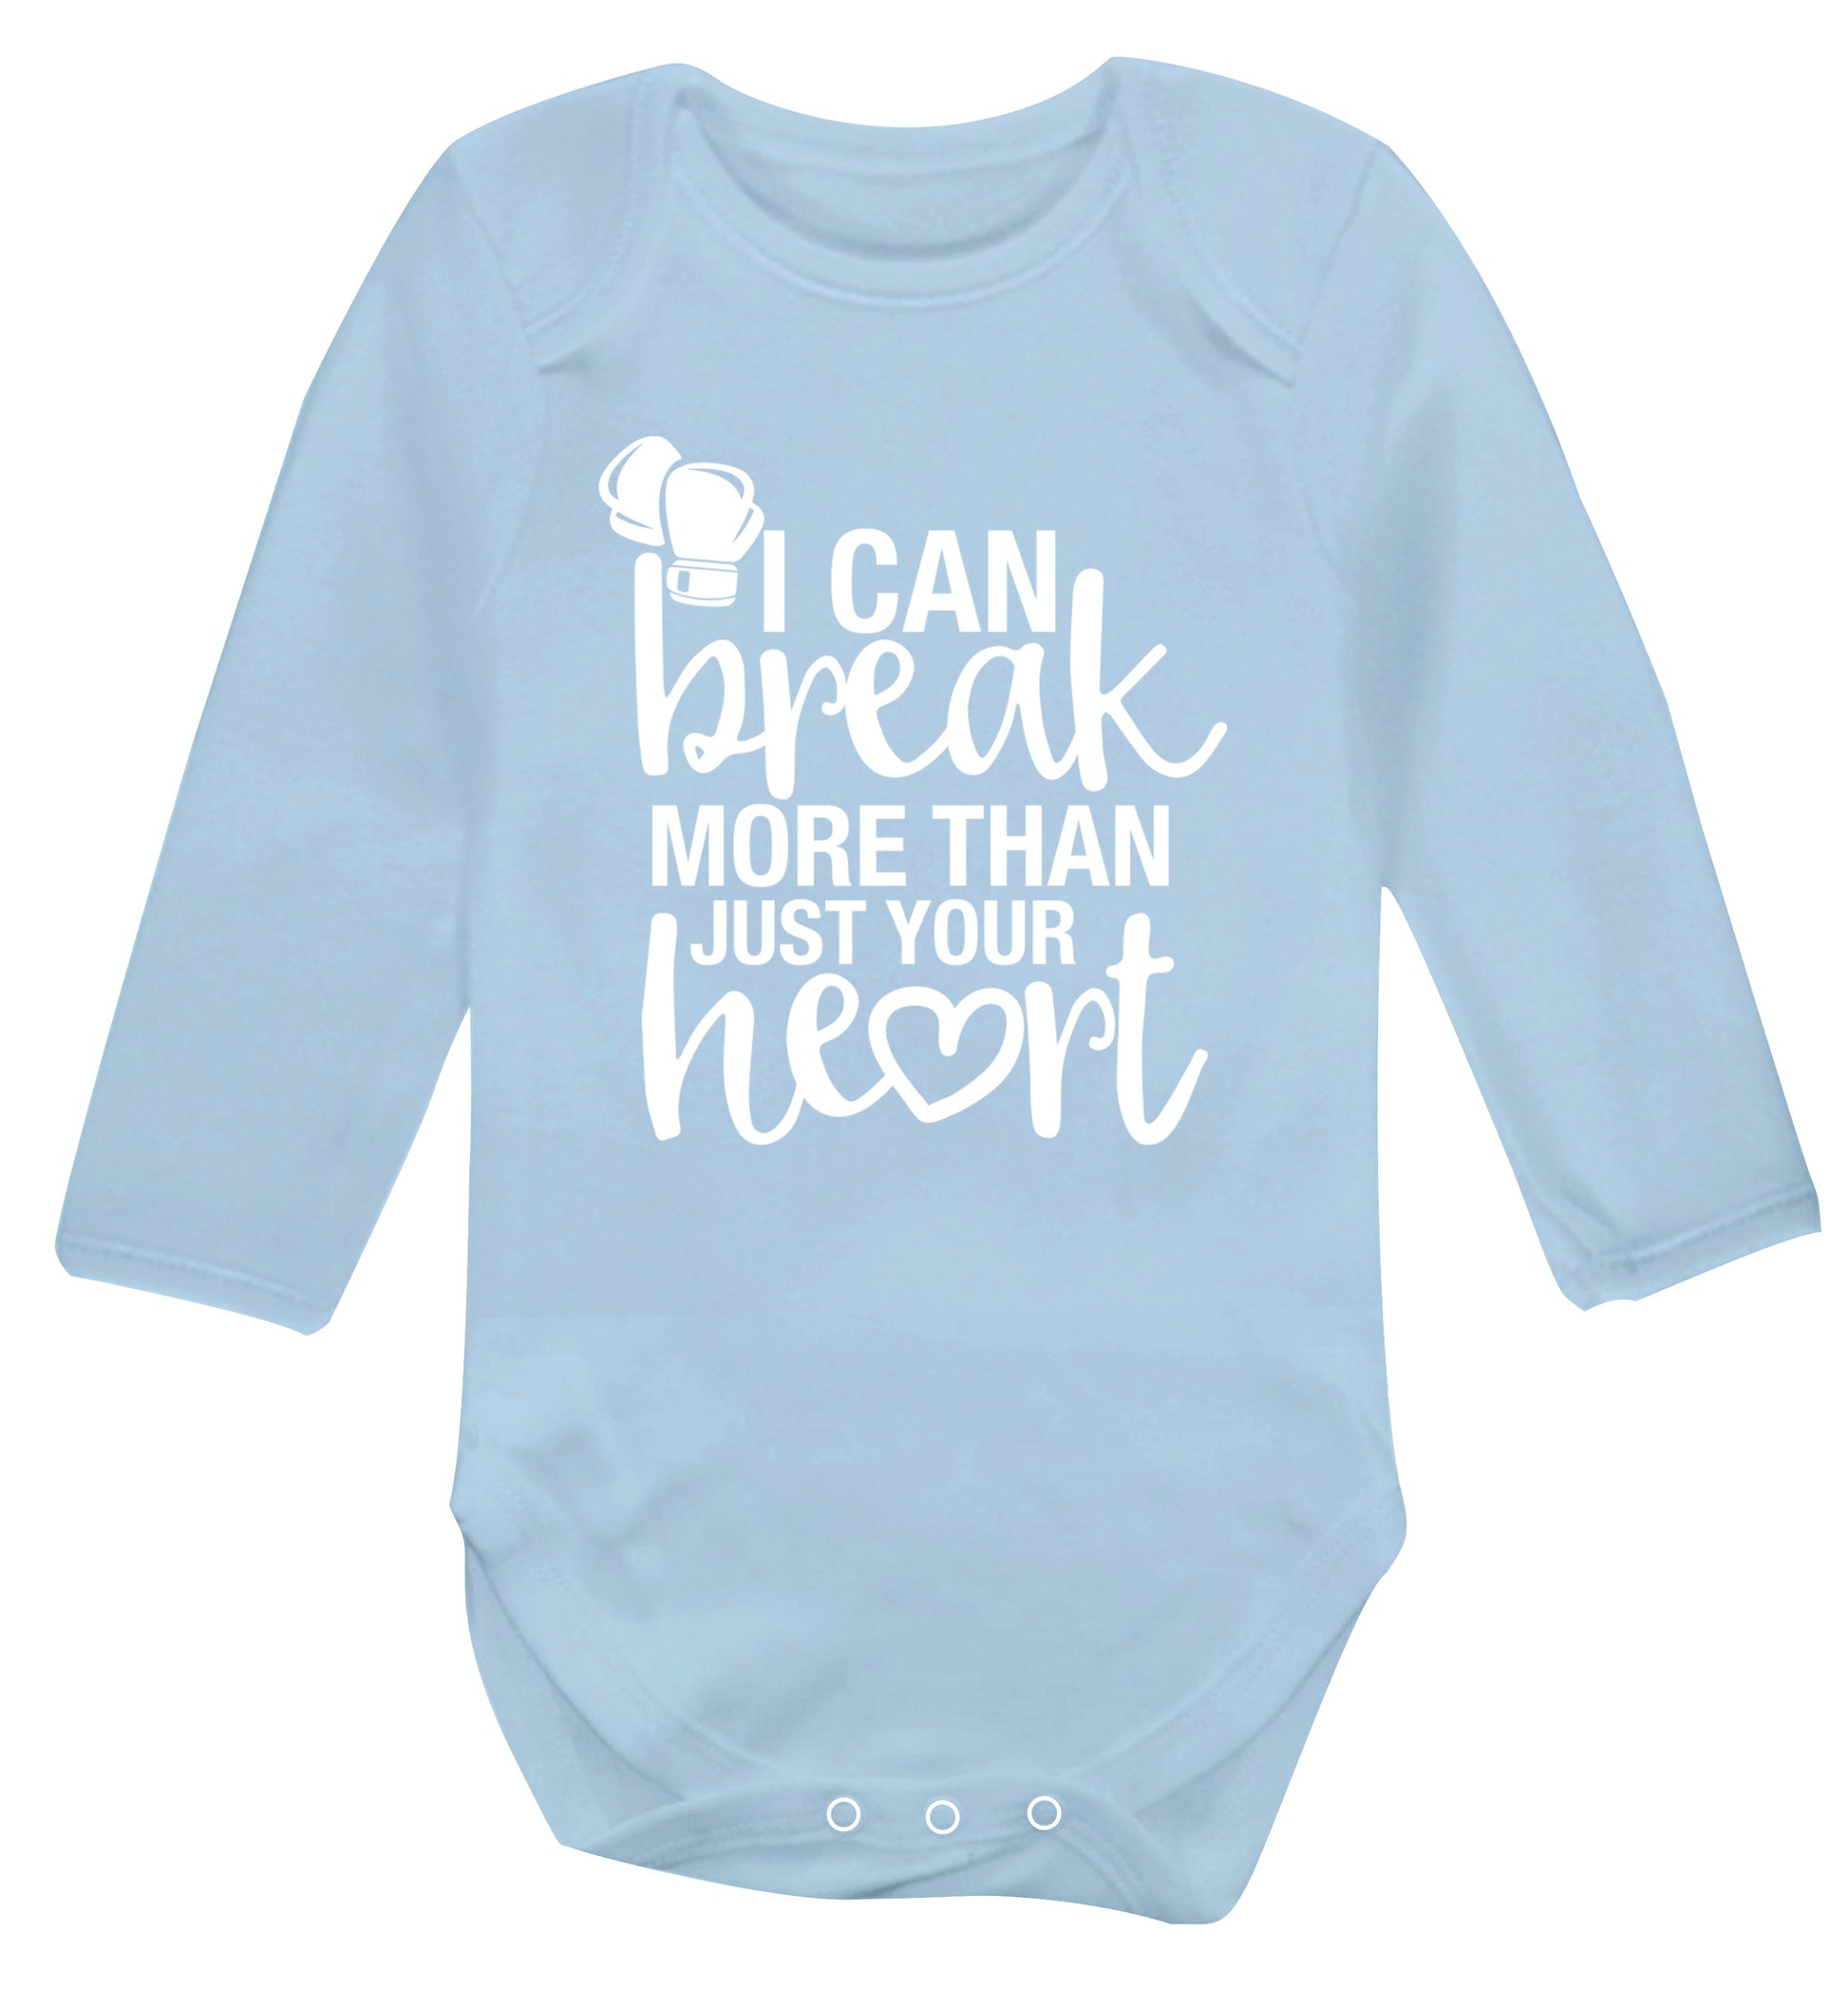 I can break more than just your heart Baby Vest long sleeved pale blue 6-12 months